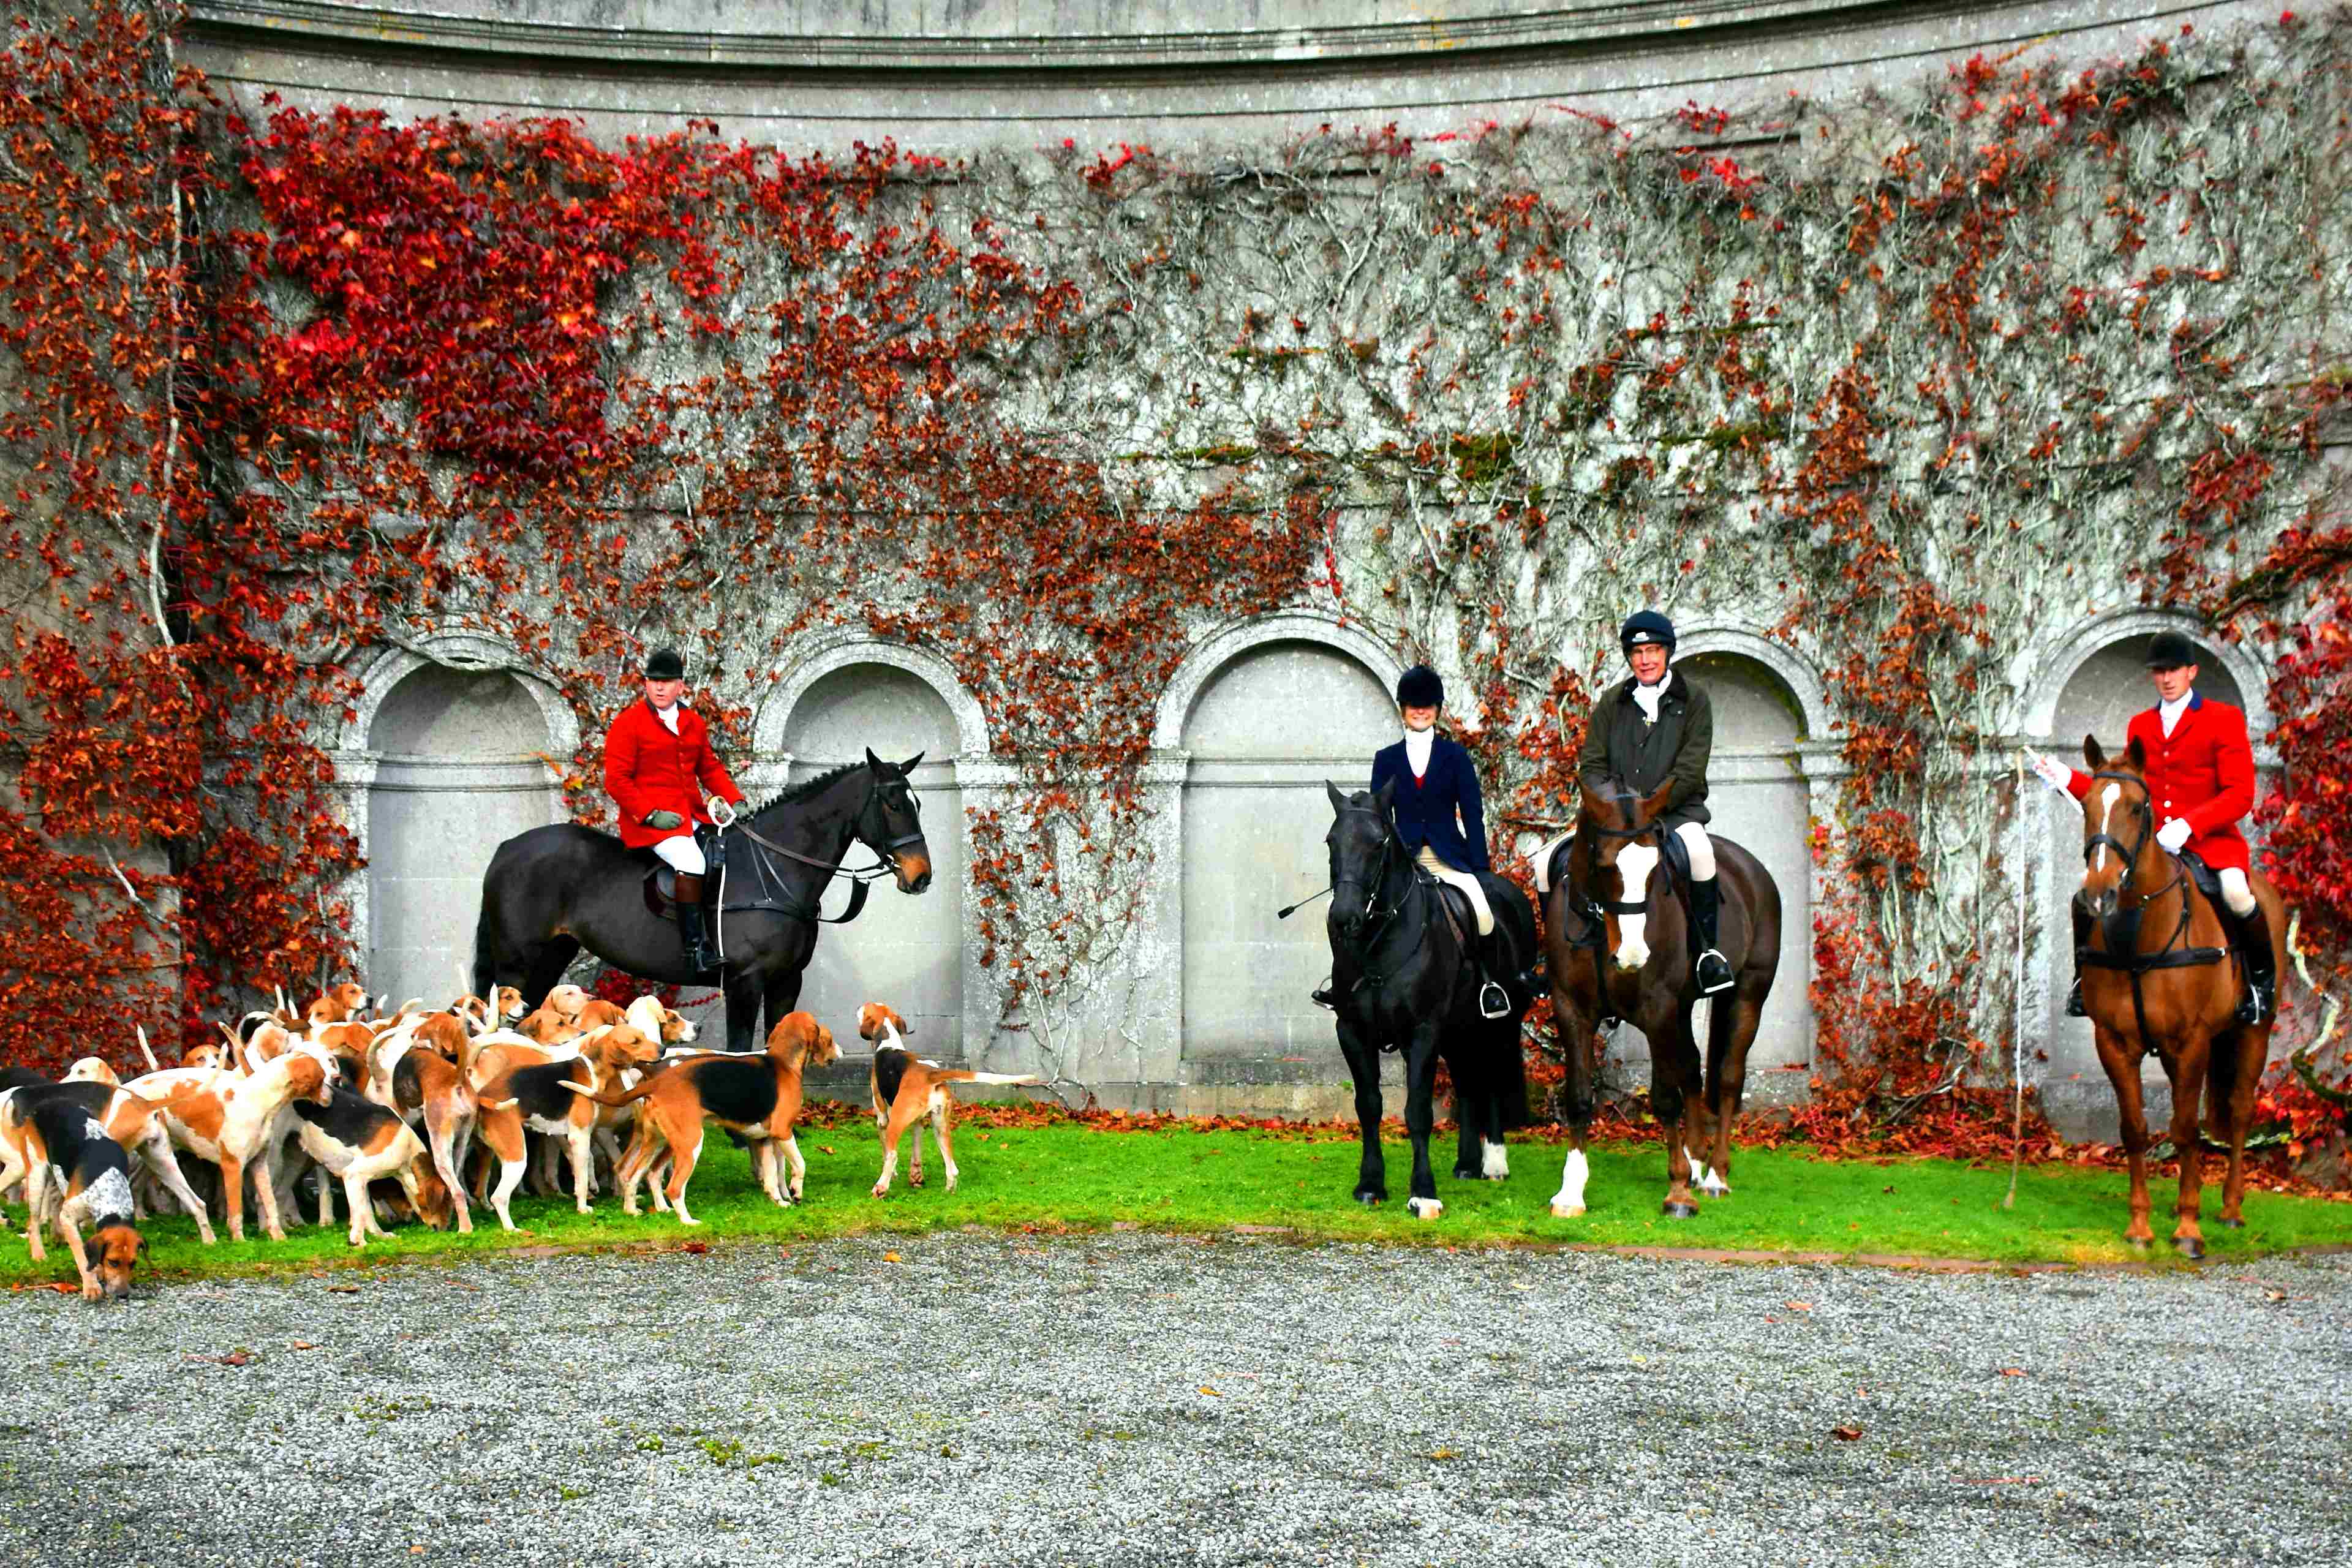 Meath Foxhounds huntsman John Henry and whipper in Barry Finnegan with the hosts of the meet Charlie Noell owner of Ardbraccan and Serina Williams Ellis at Ardbraccan House 1